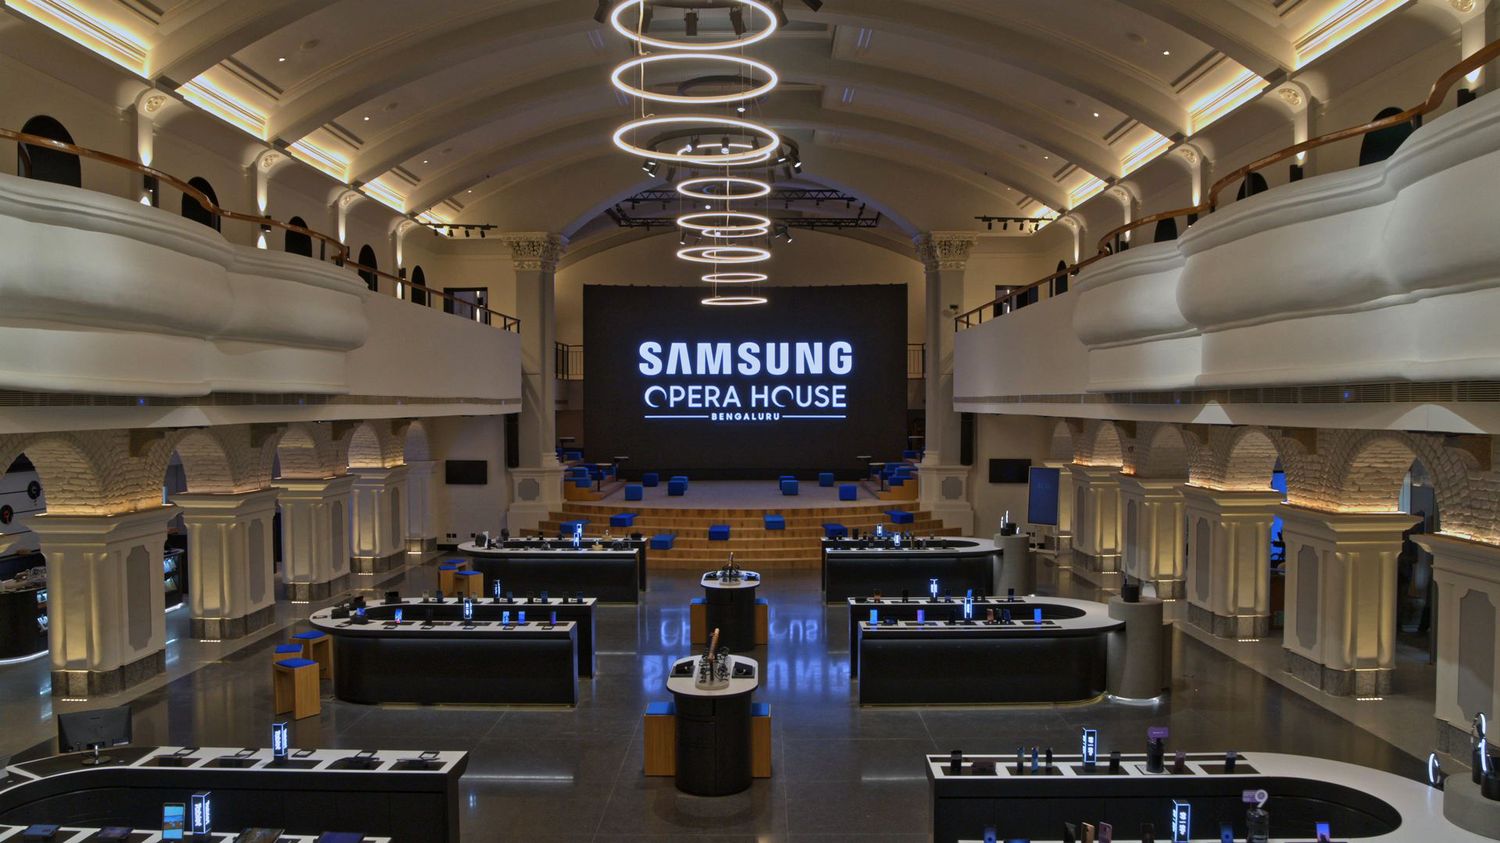 samsungs-new-opera-house-store-is-its-biggest-in-the-world